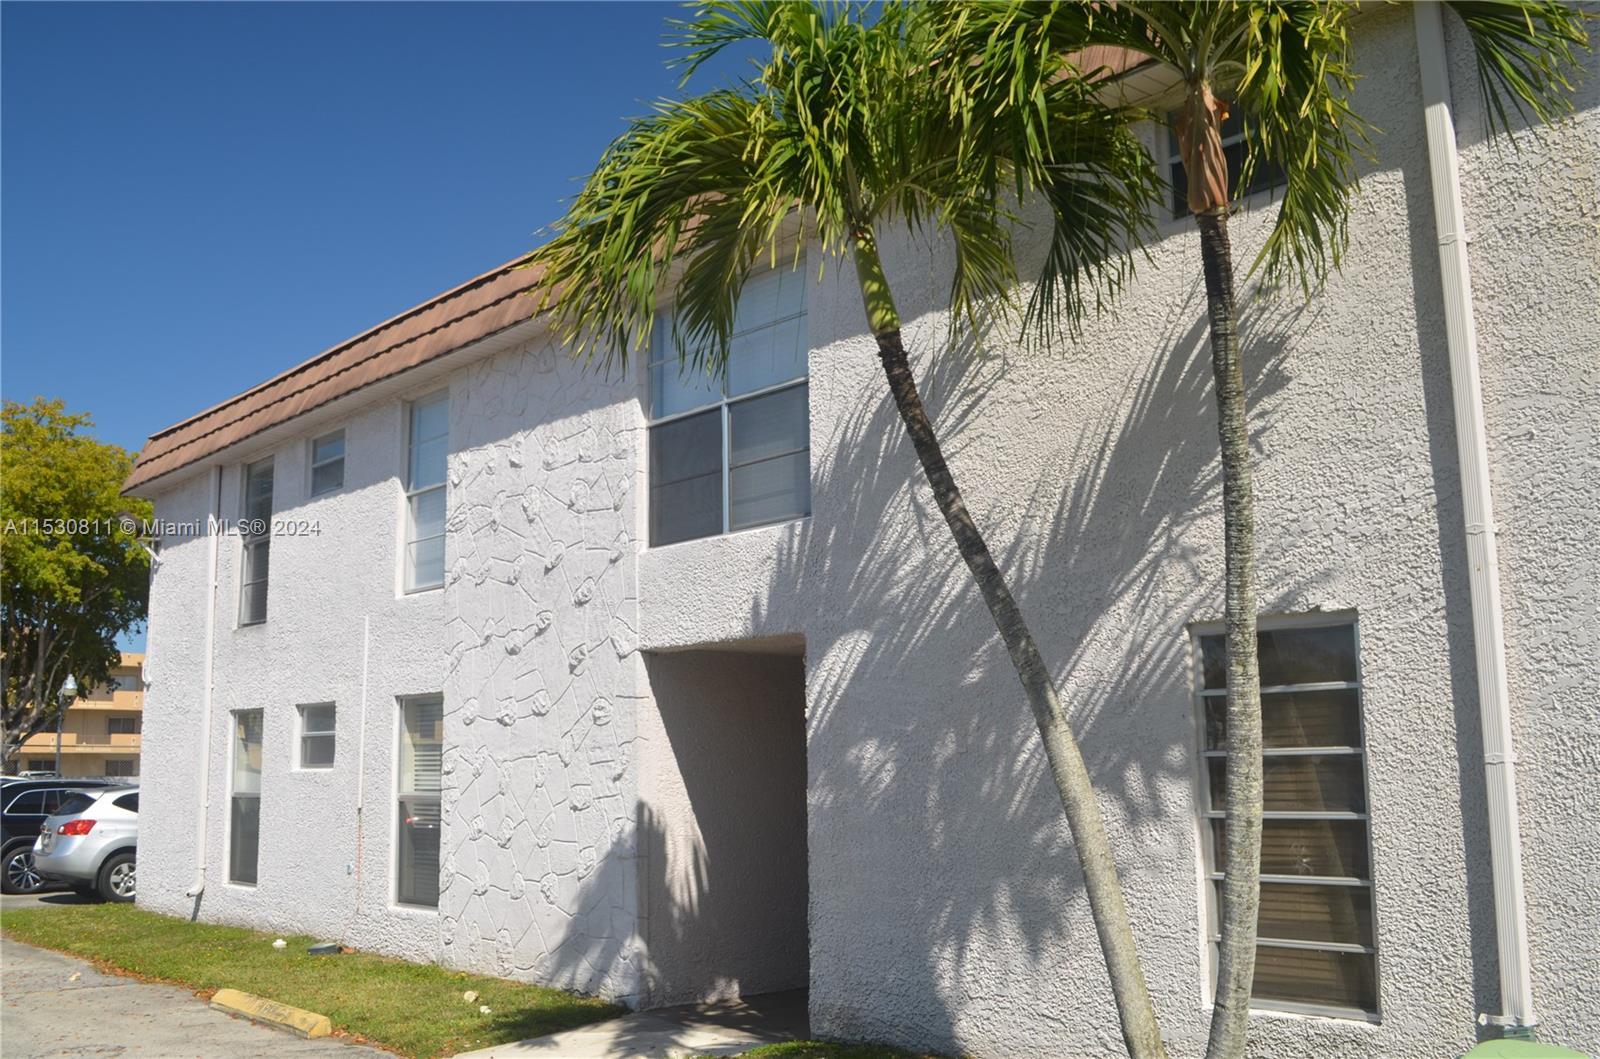 Charming 2-bedroom, 1-bathroom apartment ideally situated in Kendall, offering convenient access  in